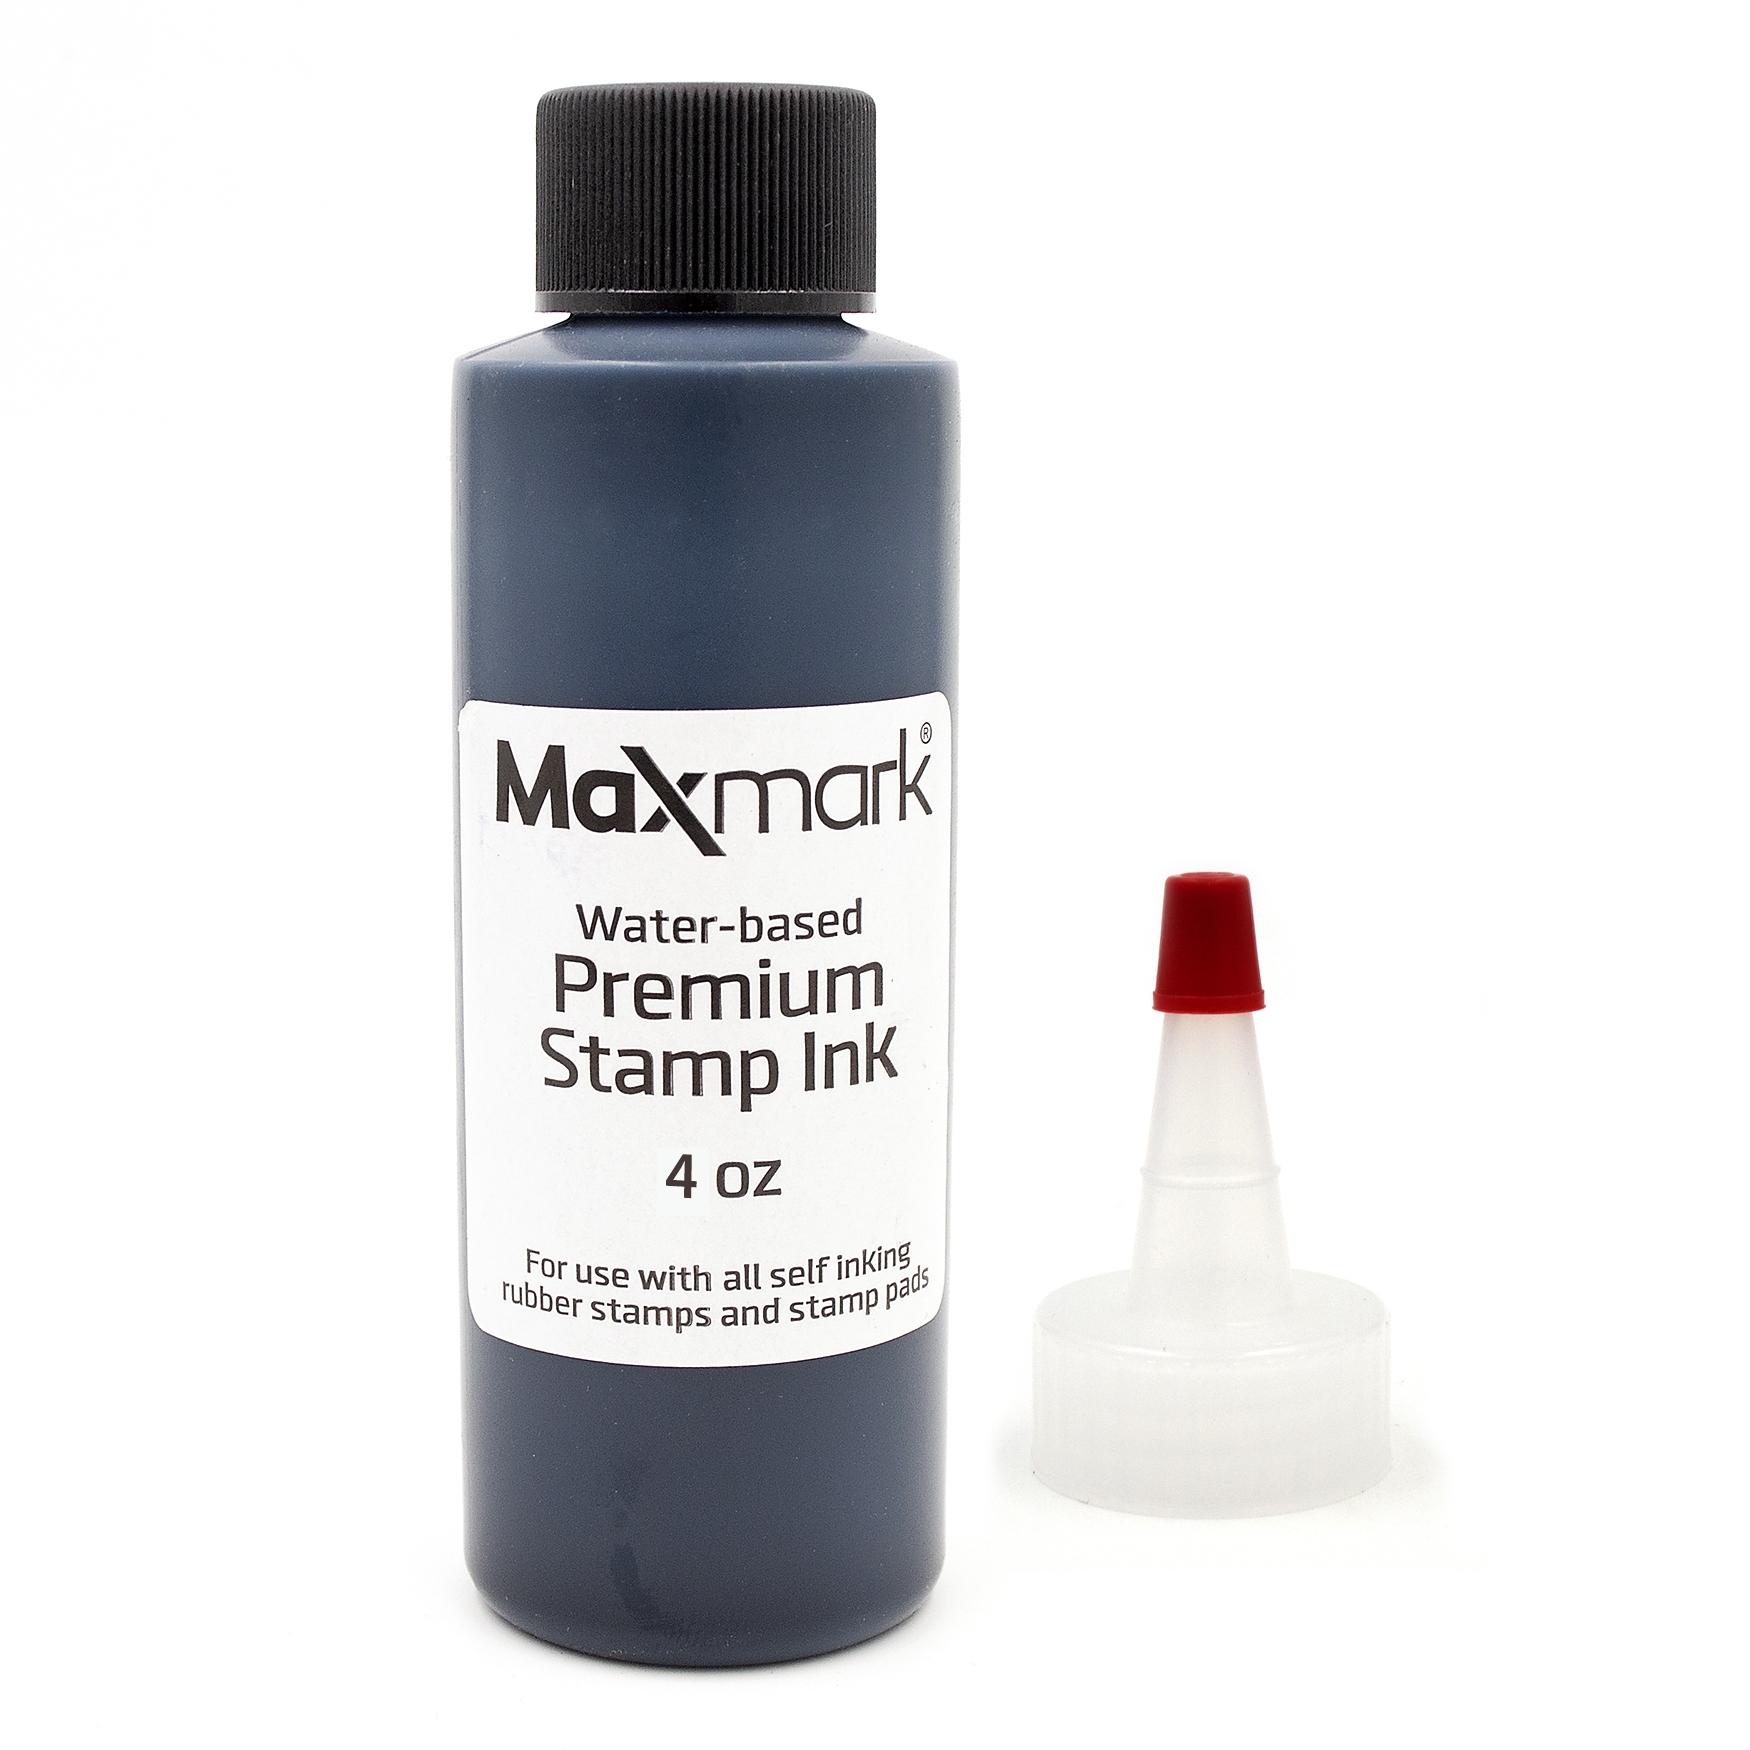 Premium Refill Ink for self Inking Stamps and Stamp Pads, Black Color - 4 oz.